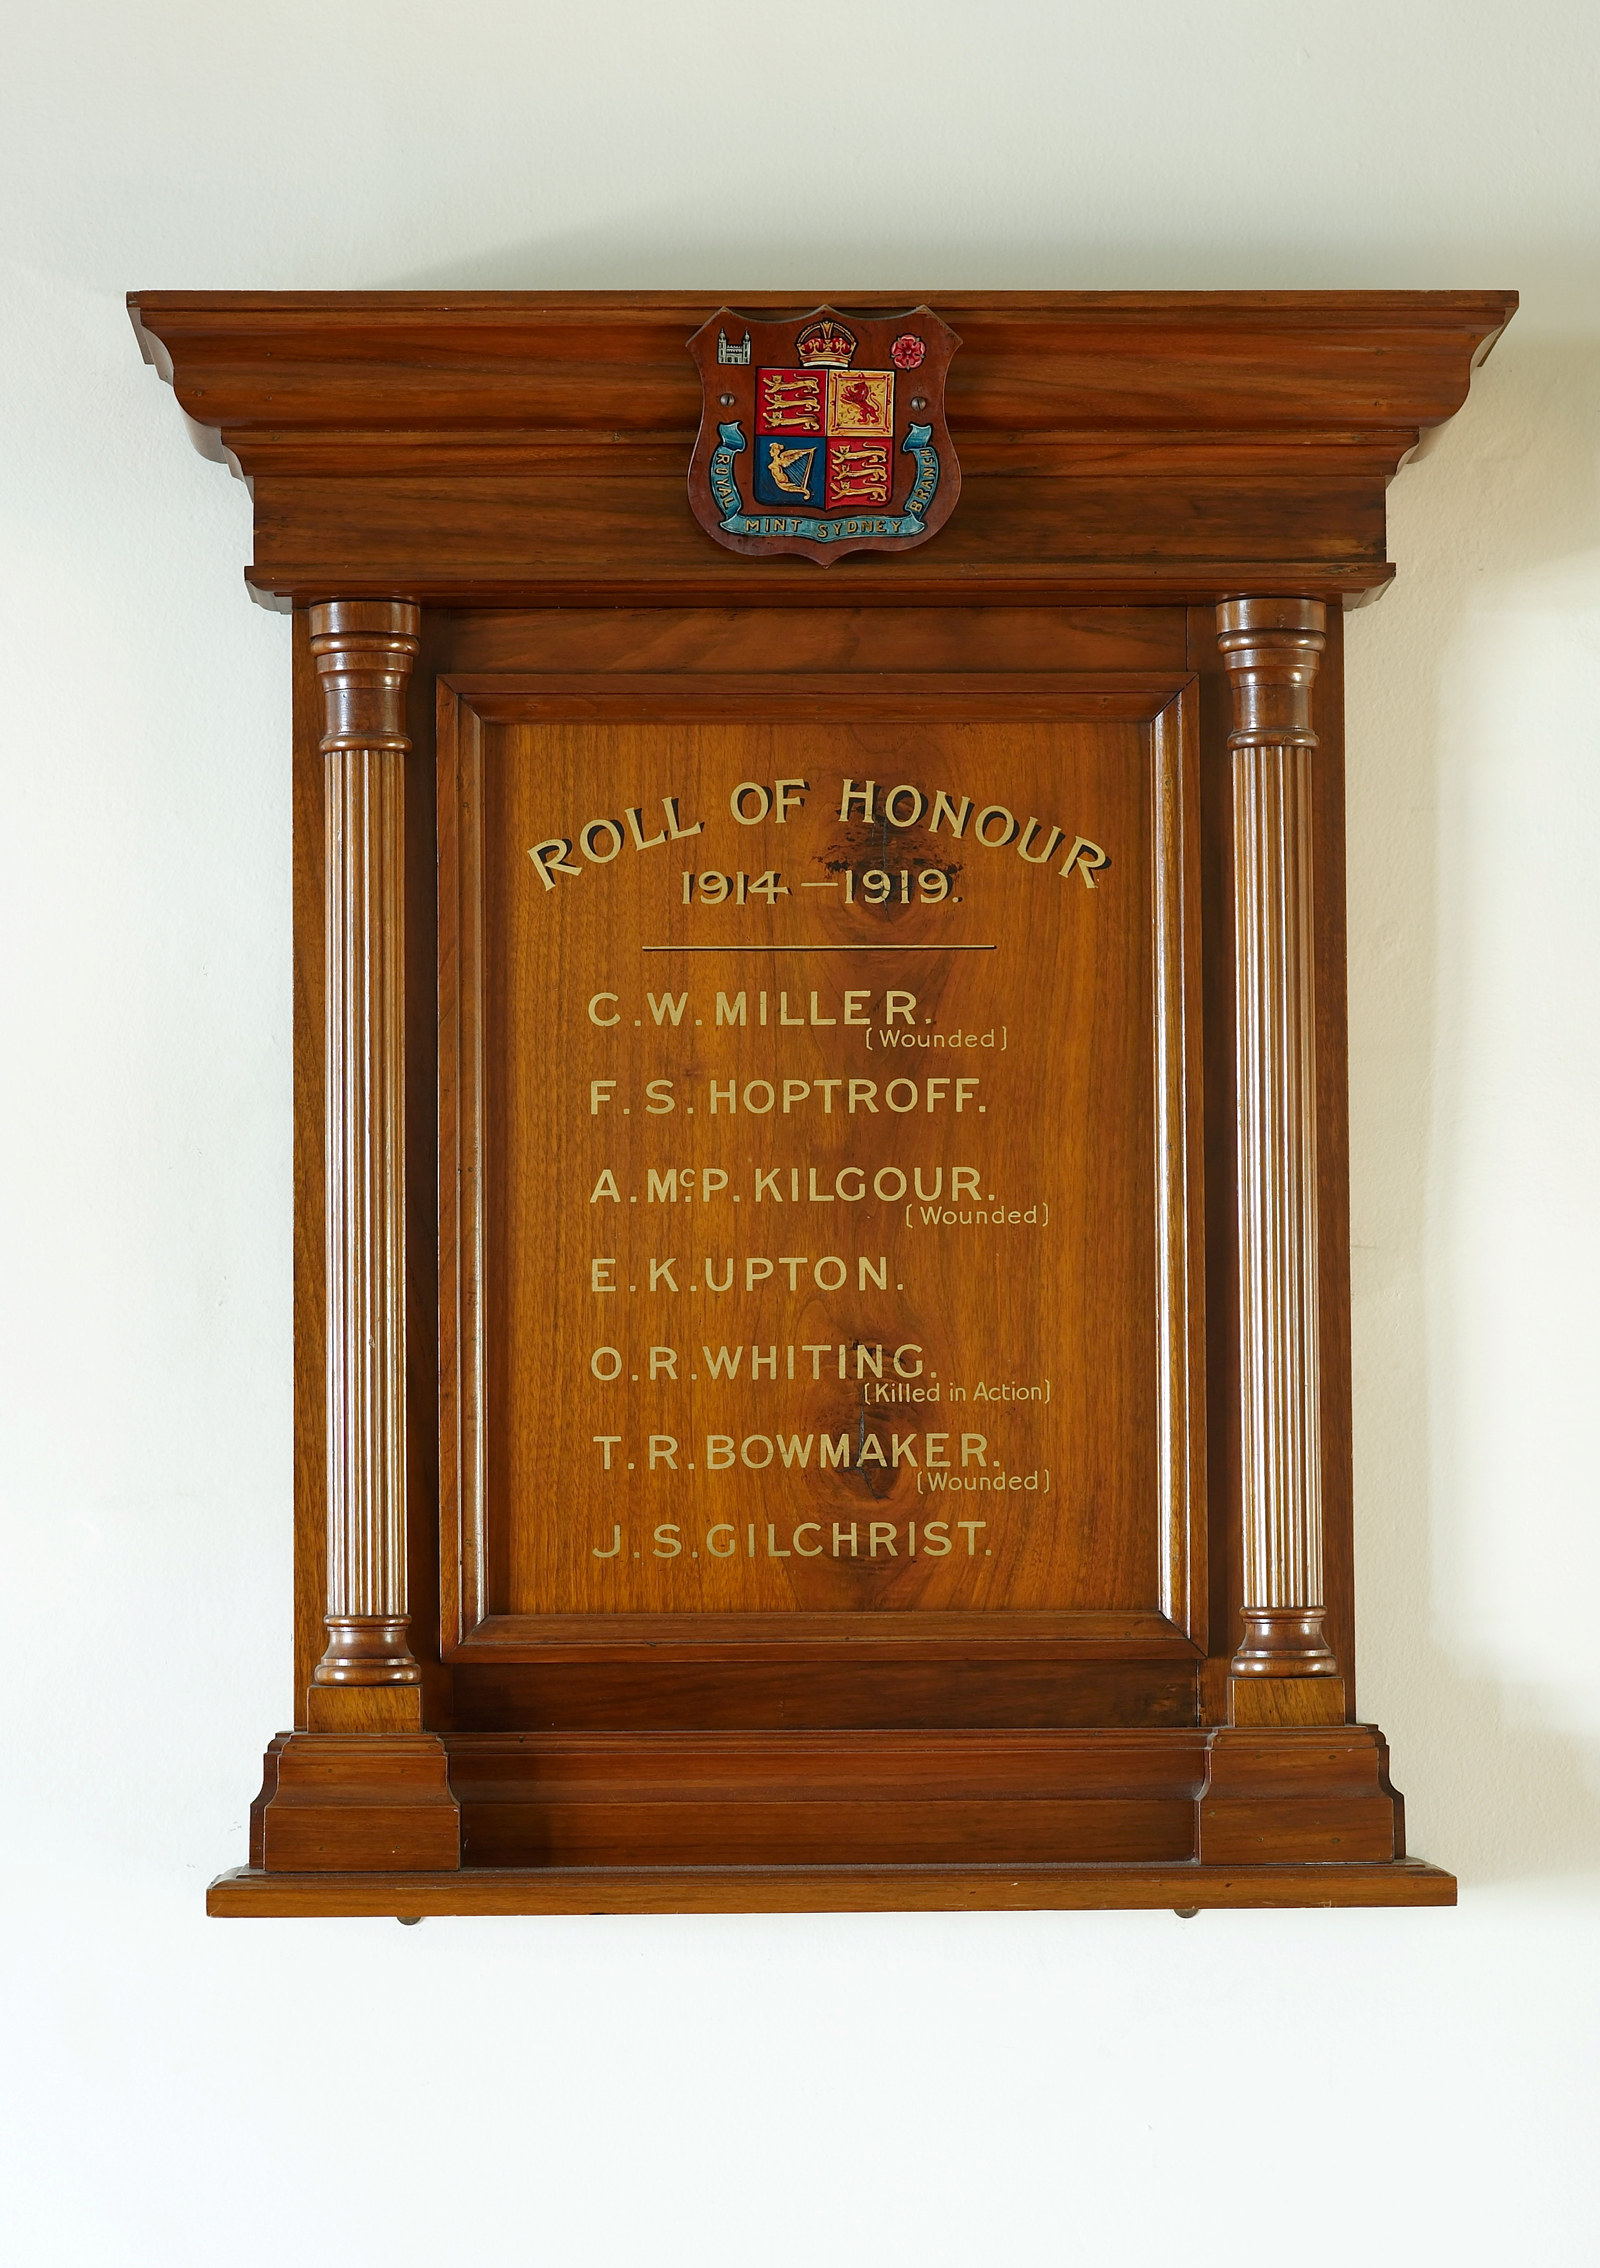 Roll of Honour for staff of the Royal Mint, Sydney, who served in World War I, hanging outside the boardroom at the Mint, 1914 - 1919